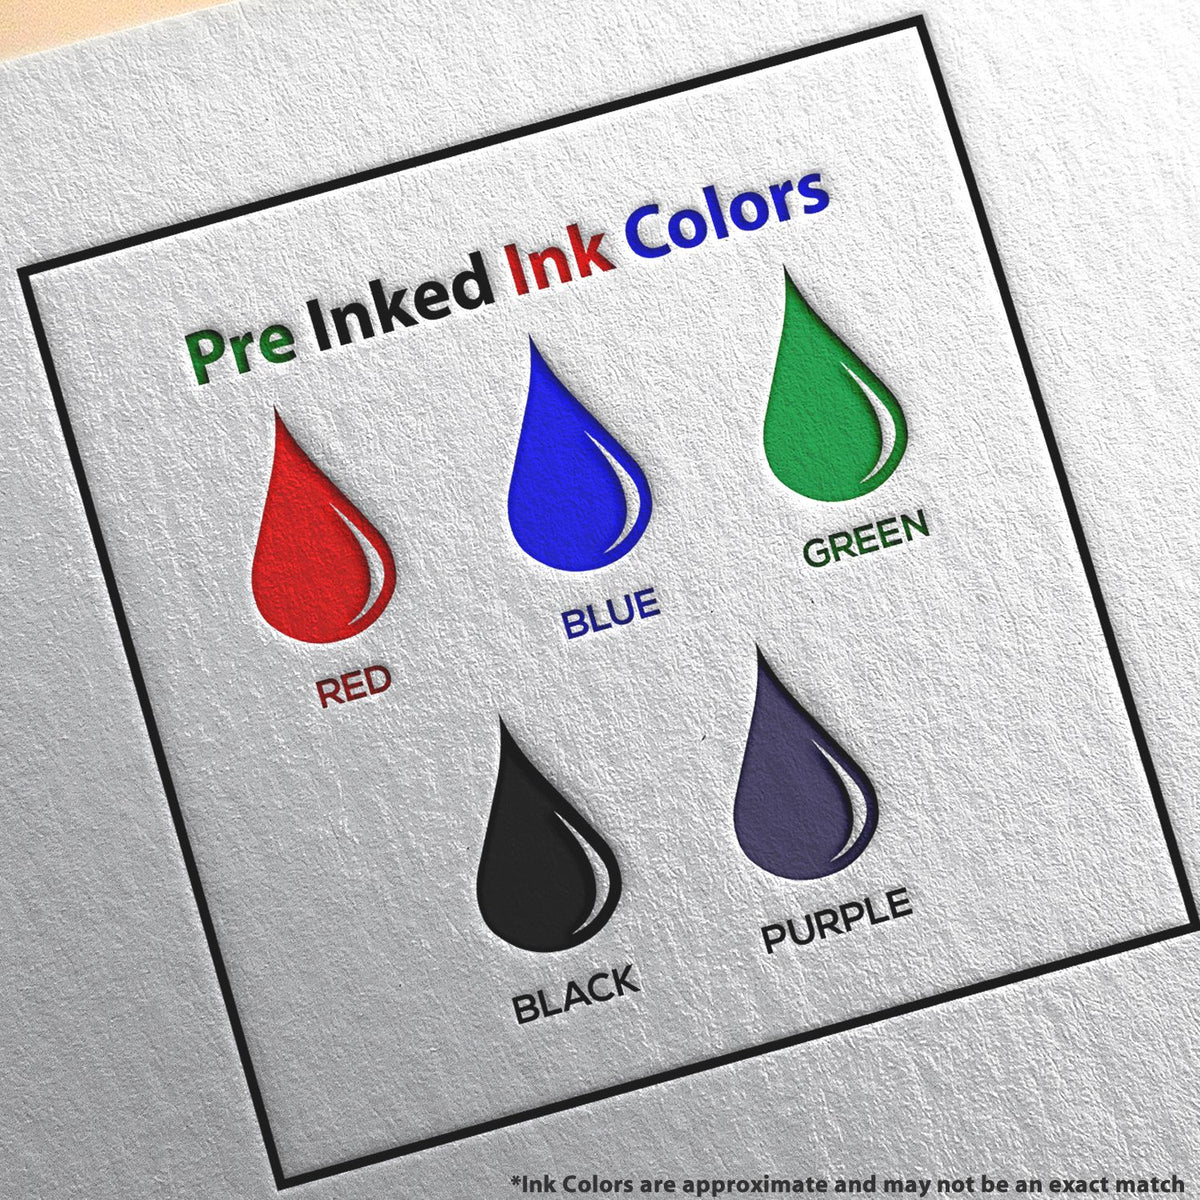 A picture showing the different ink colors or hues available for the Slim Pre-Inked Georgia Architect Seal Stamp product.